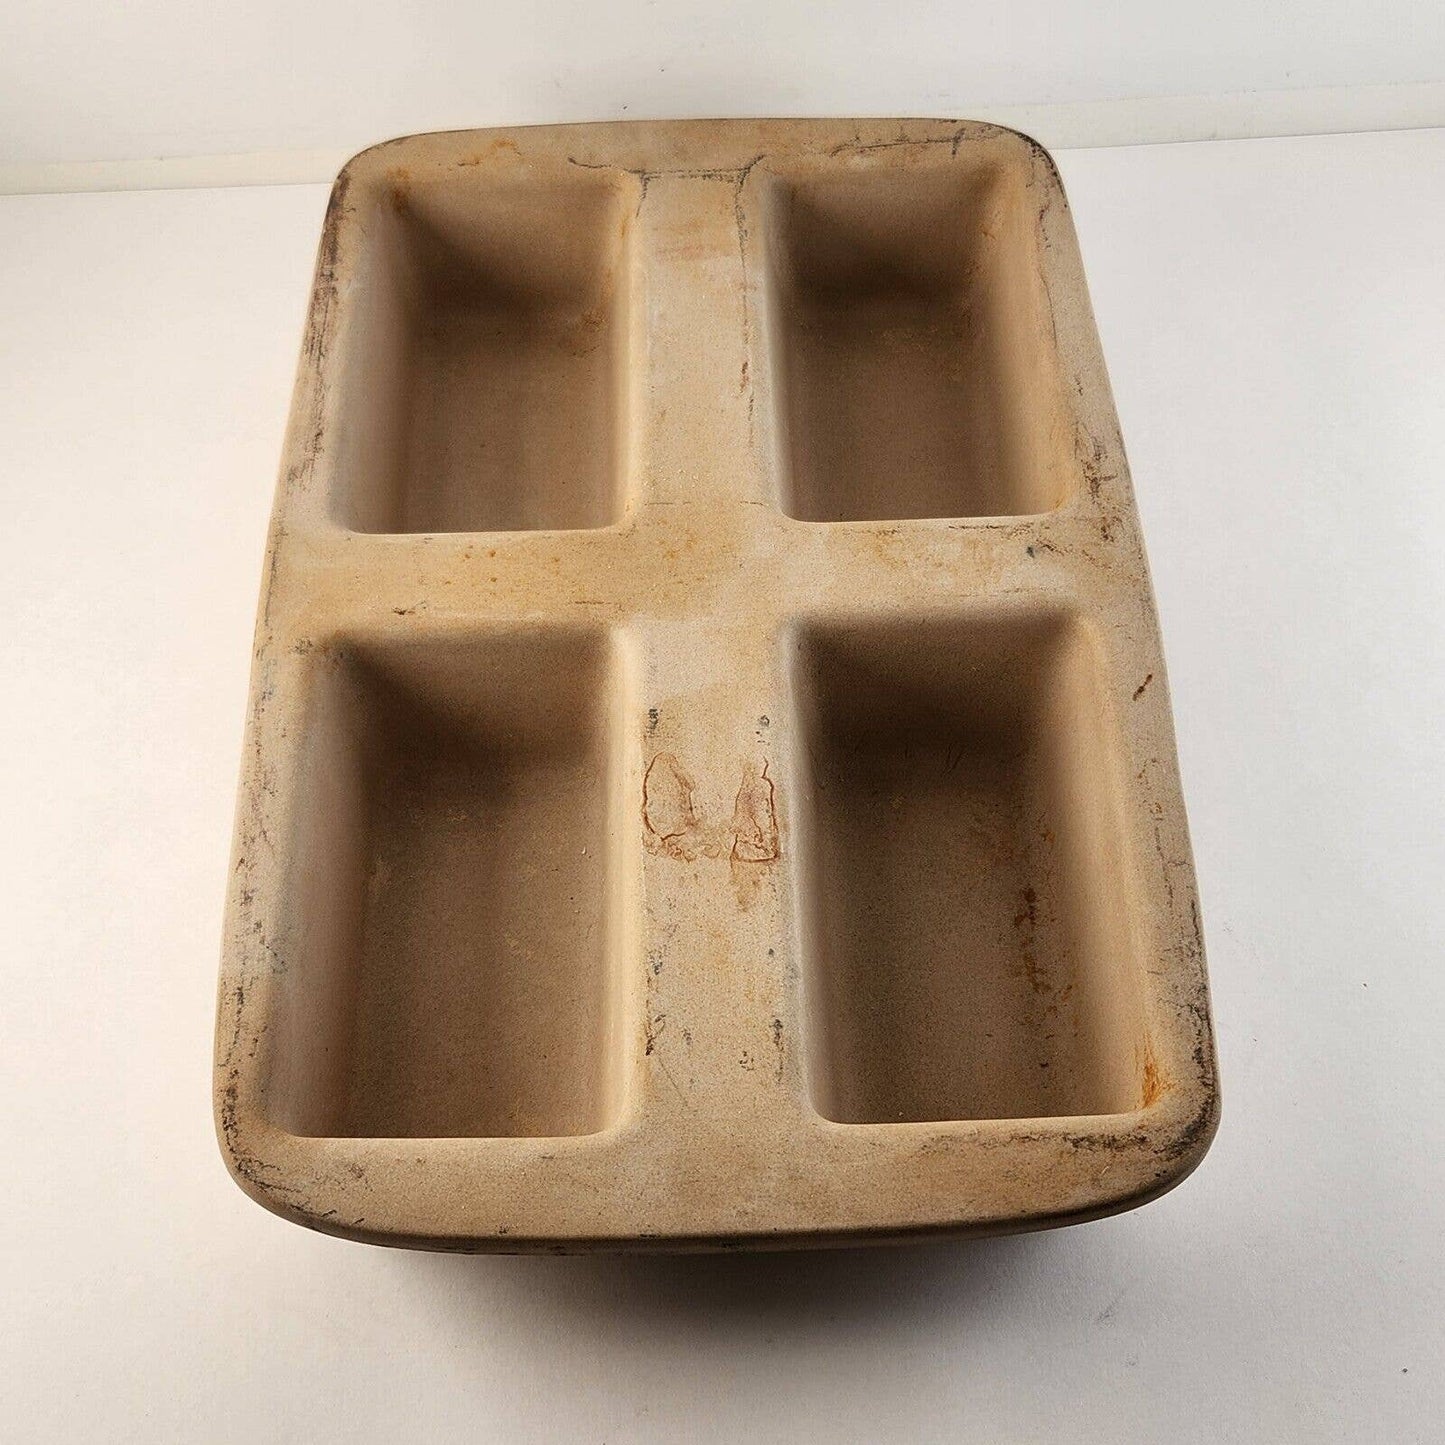 Pampered Chef 4 Loaf Mini Bread Baking Pan Family Heritage Stoneware Classic